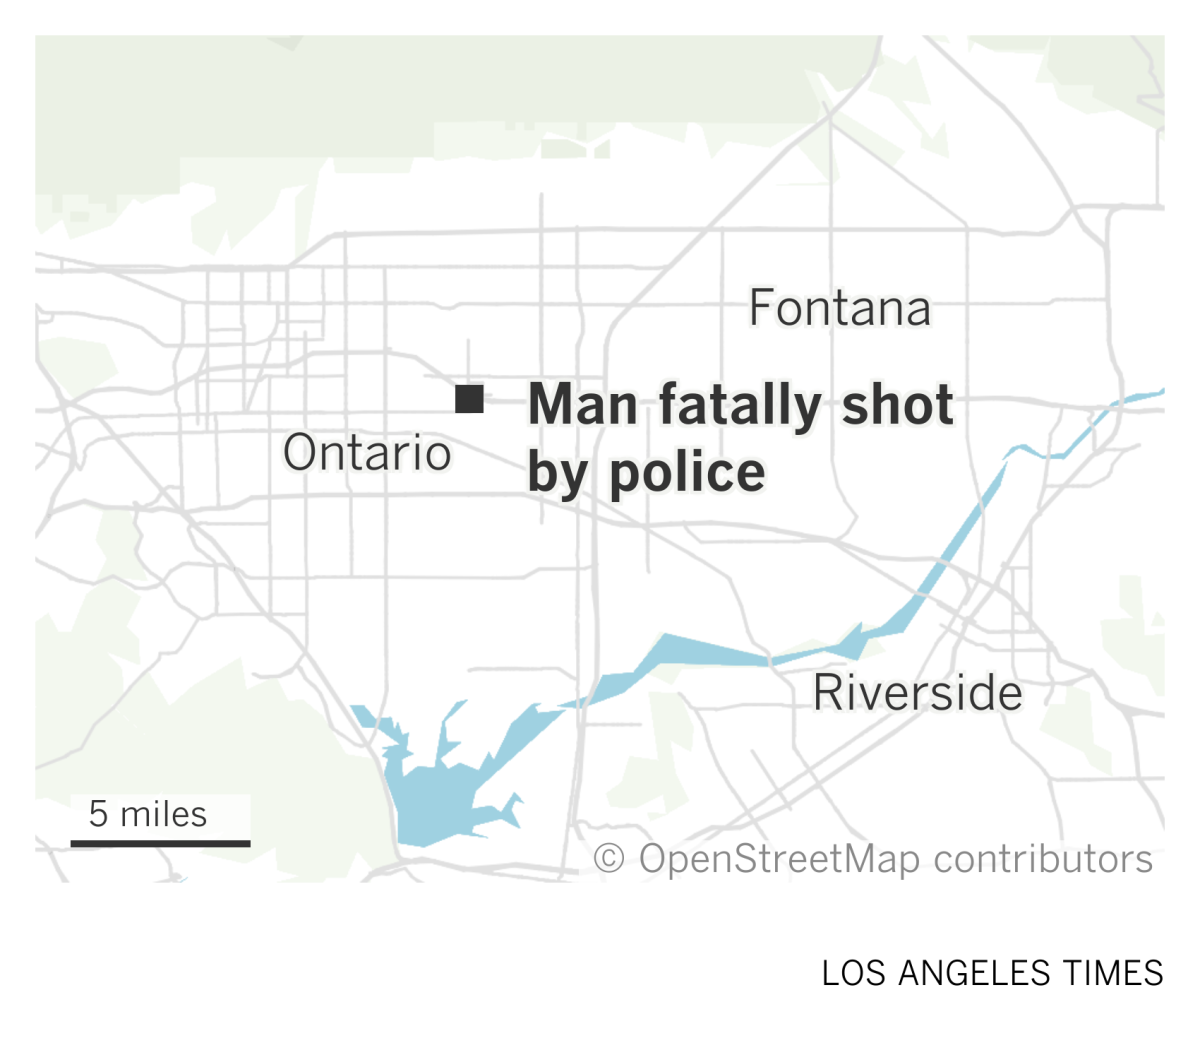 A map of the Inland Empire area showing where a man was fatally shot by police in Ontario